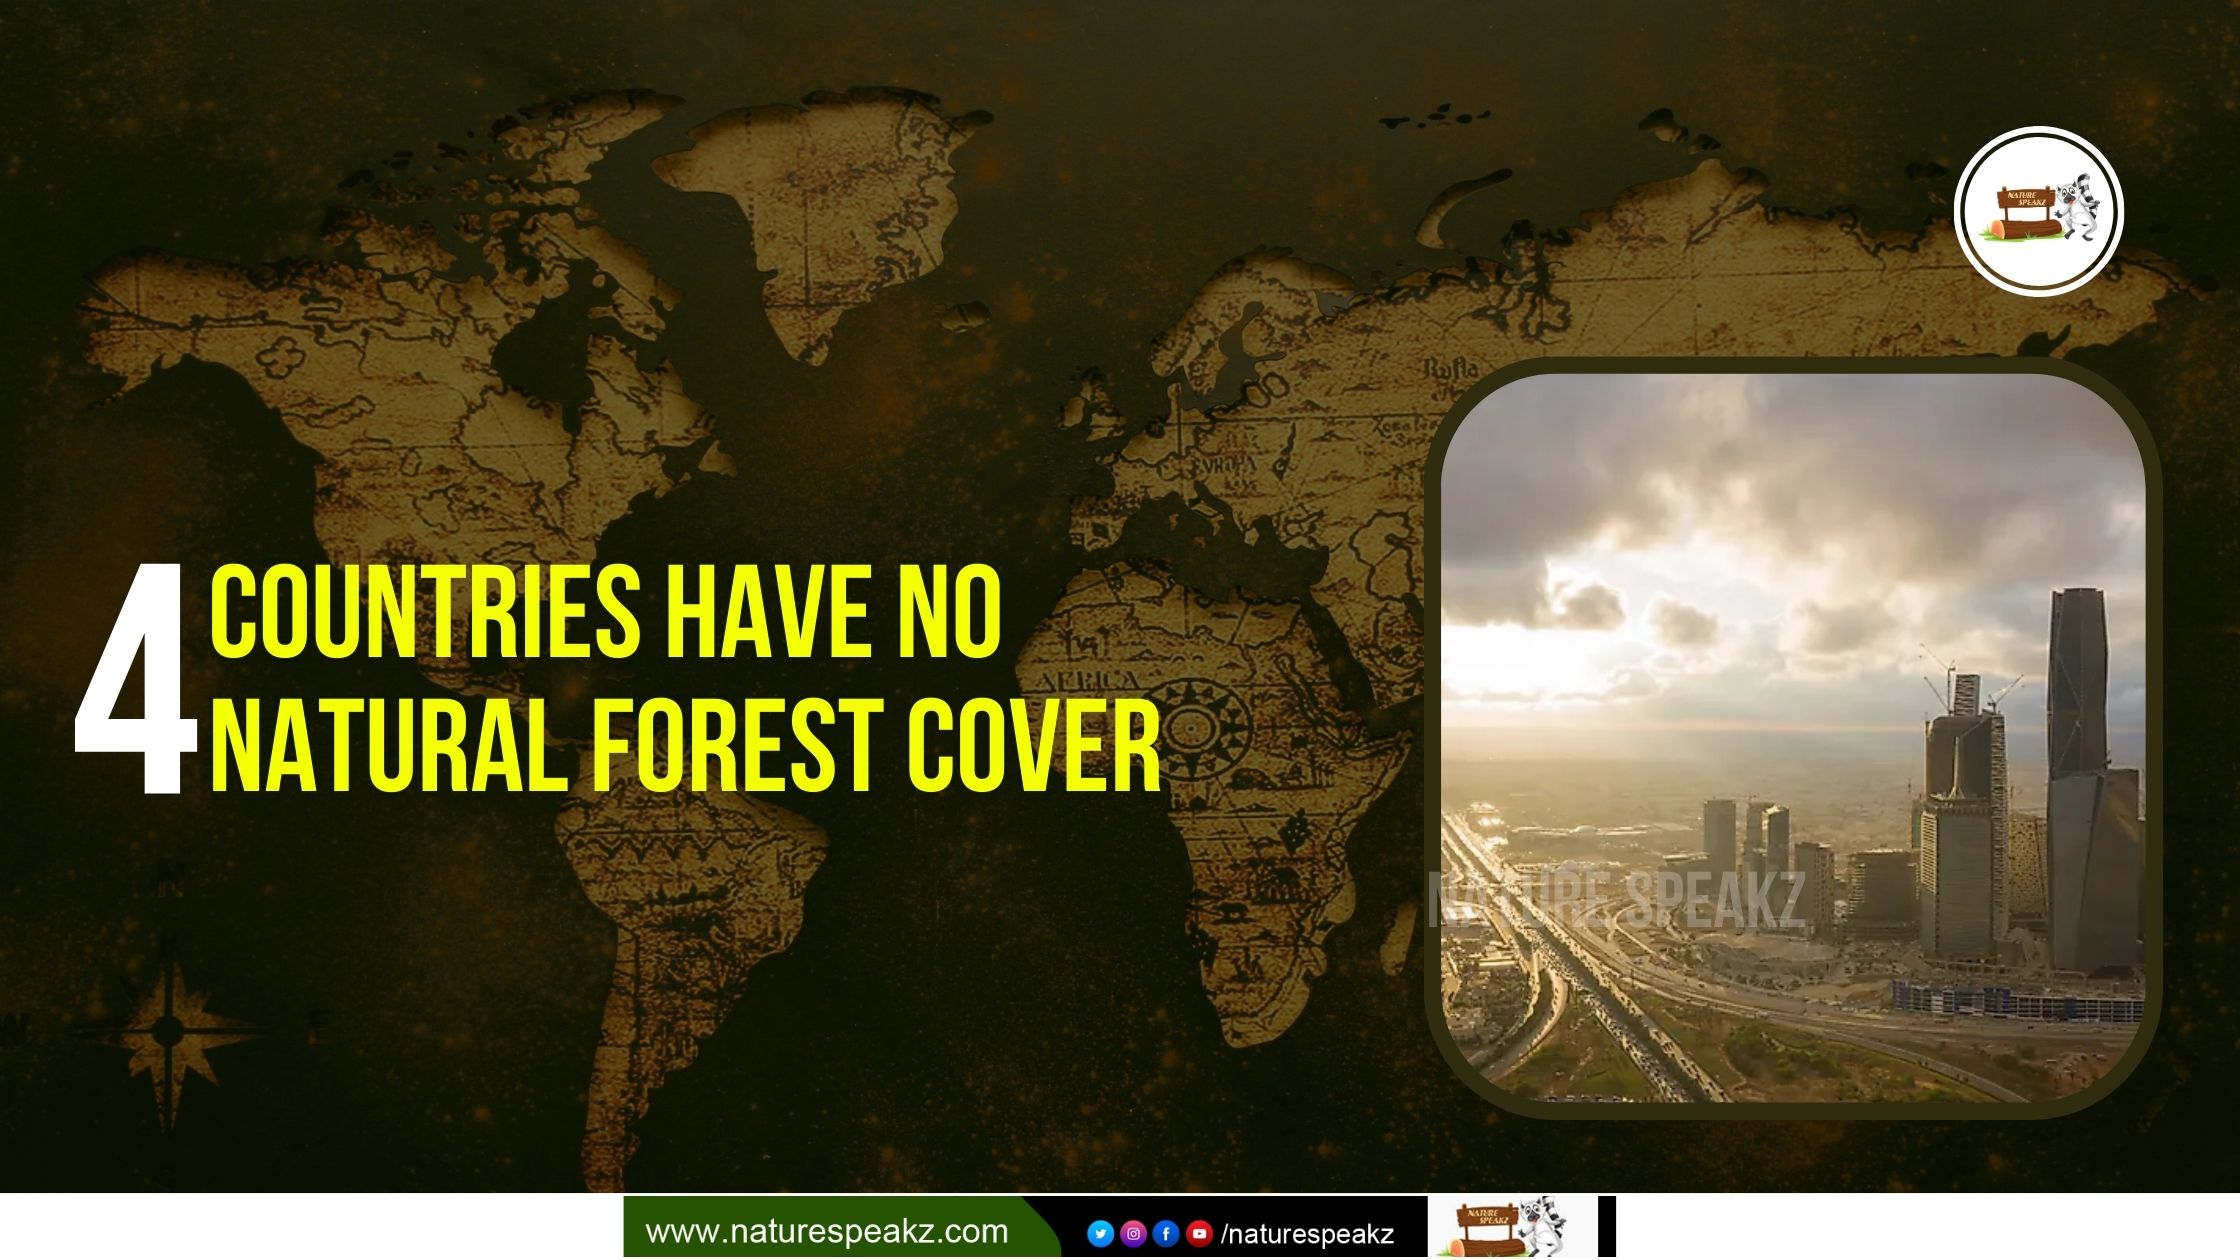 4 Countries have no natural forest cover